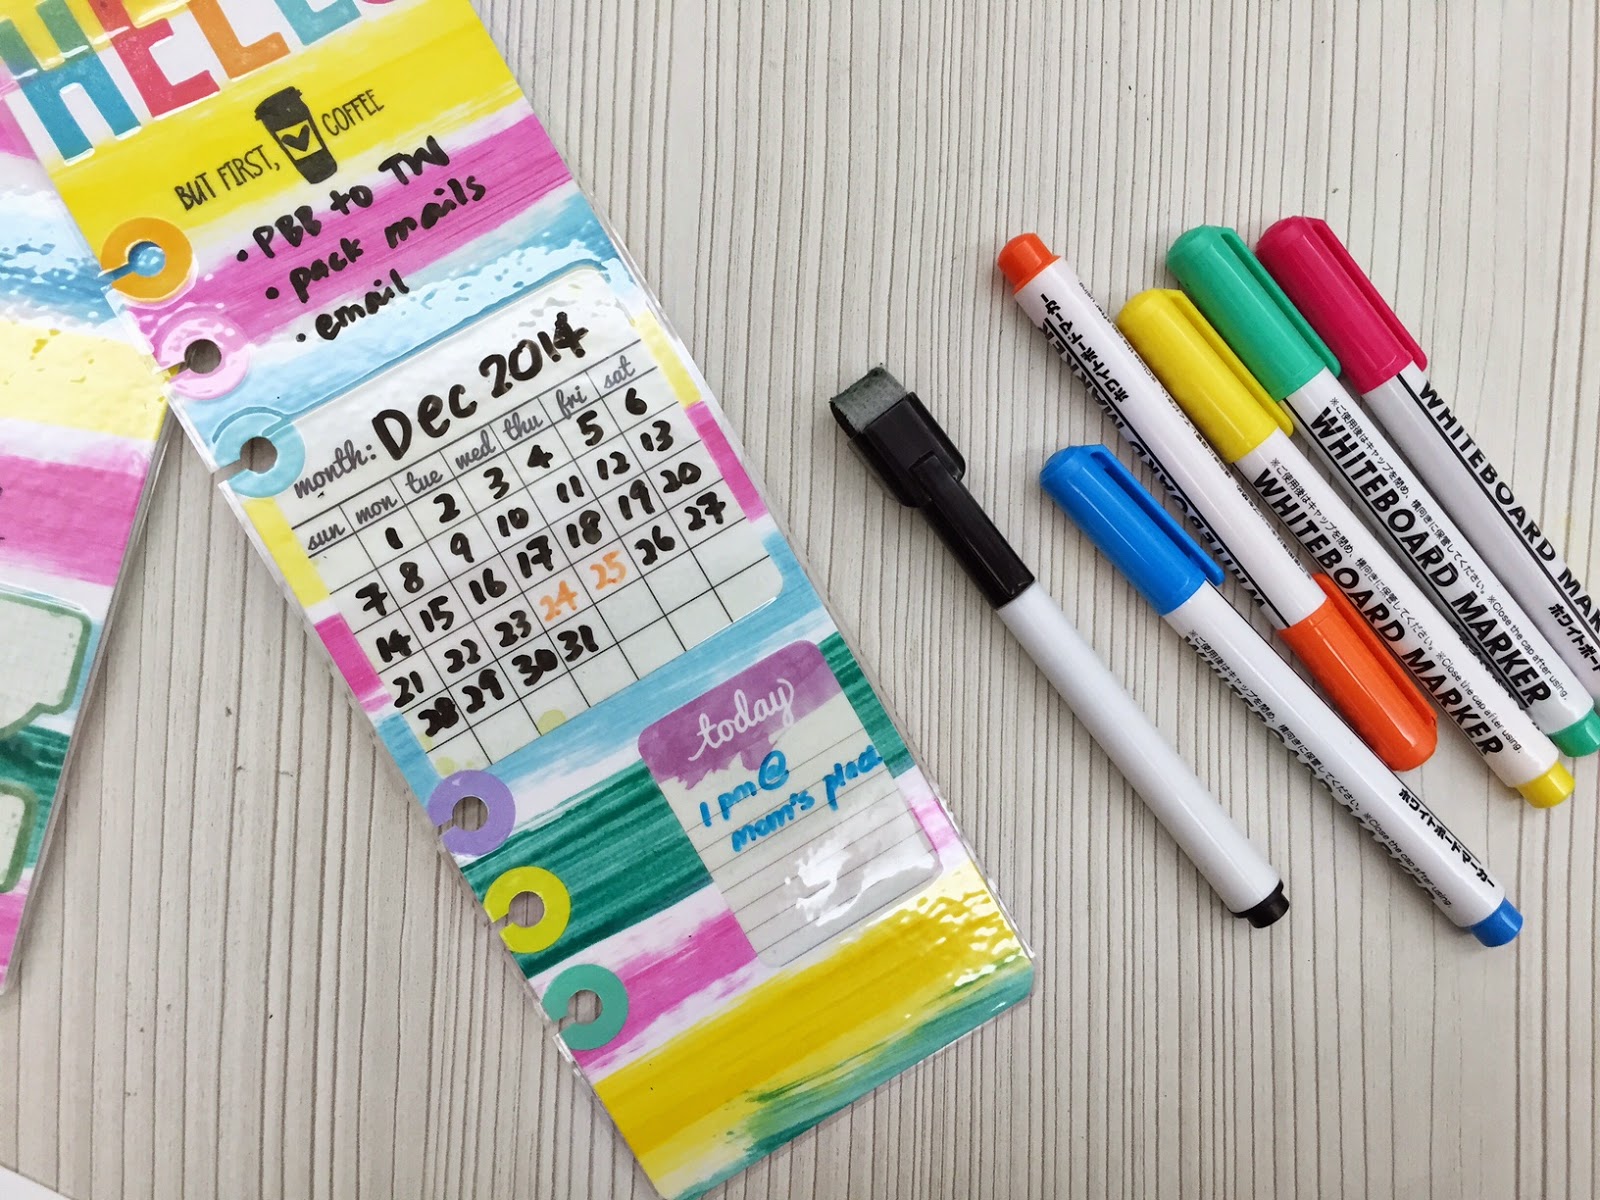 Passion Planner - Passion Markers (6-pack)